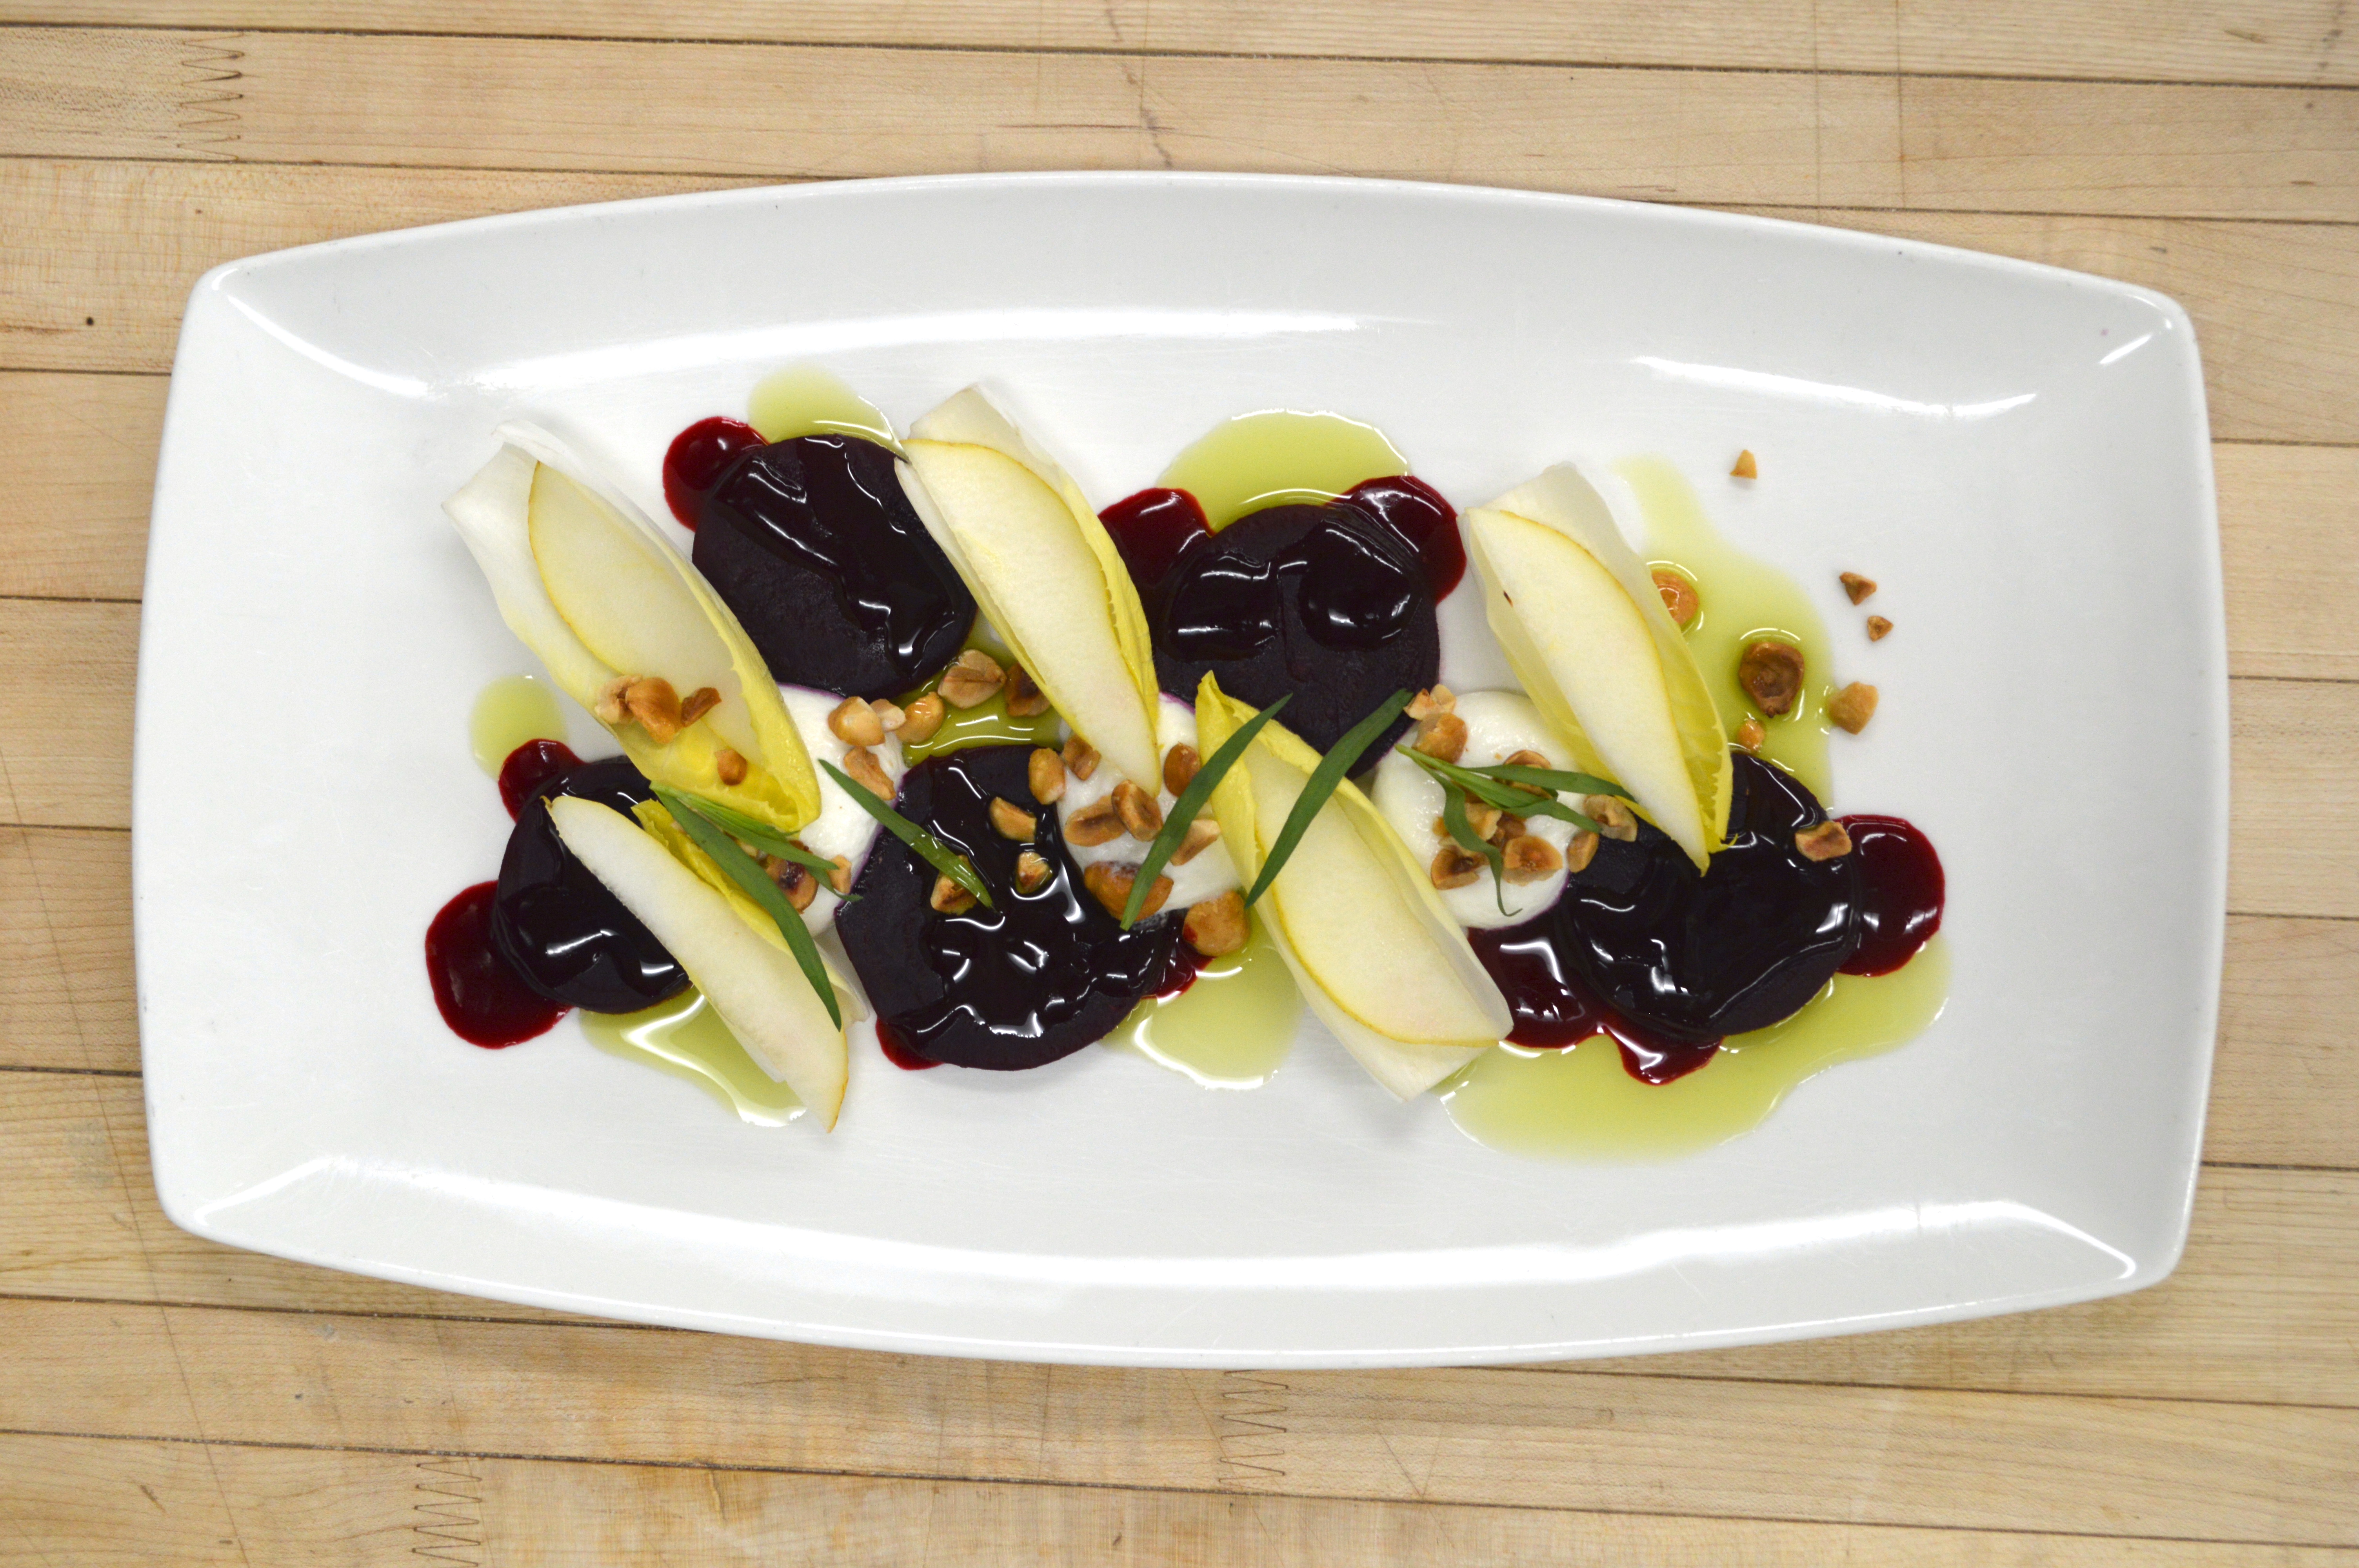 A winter beet salad with goat cheese, endive, pear, hazelnut, and tarragon.